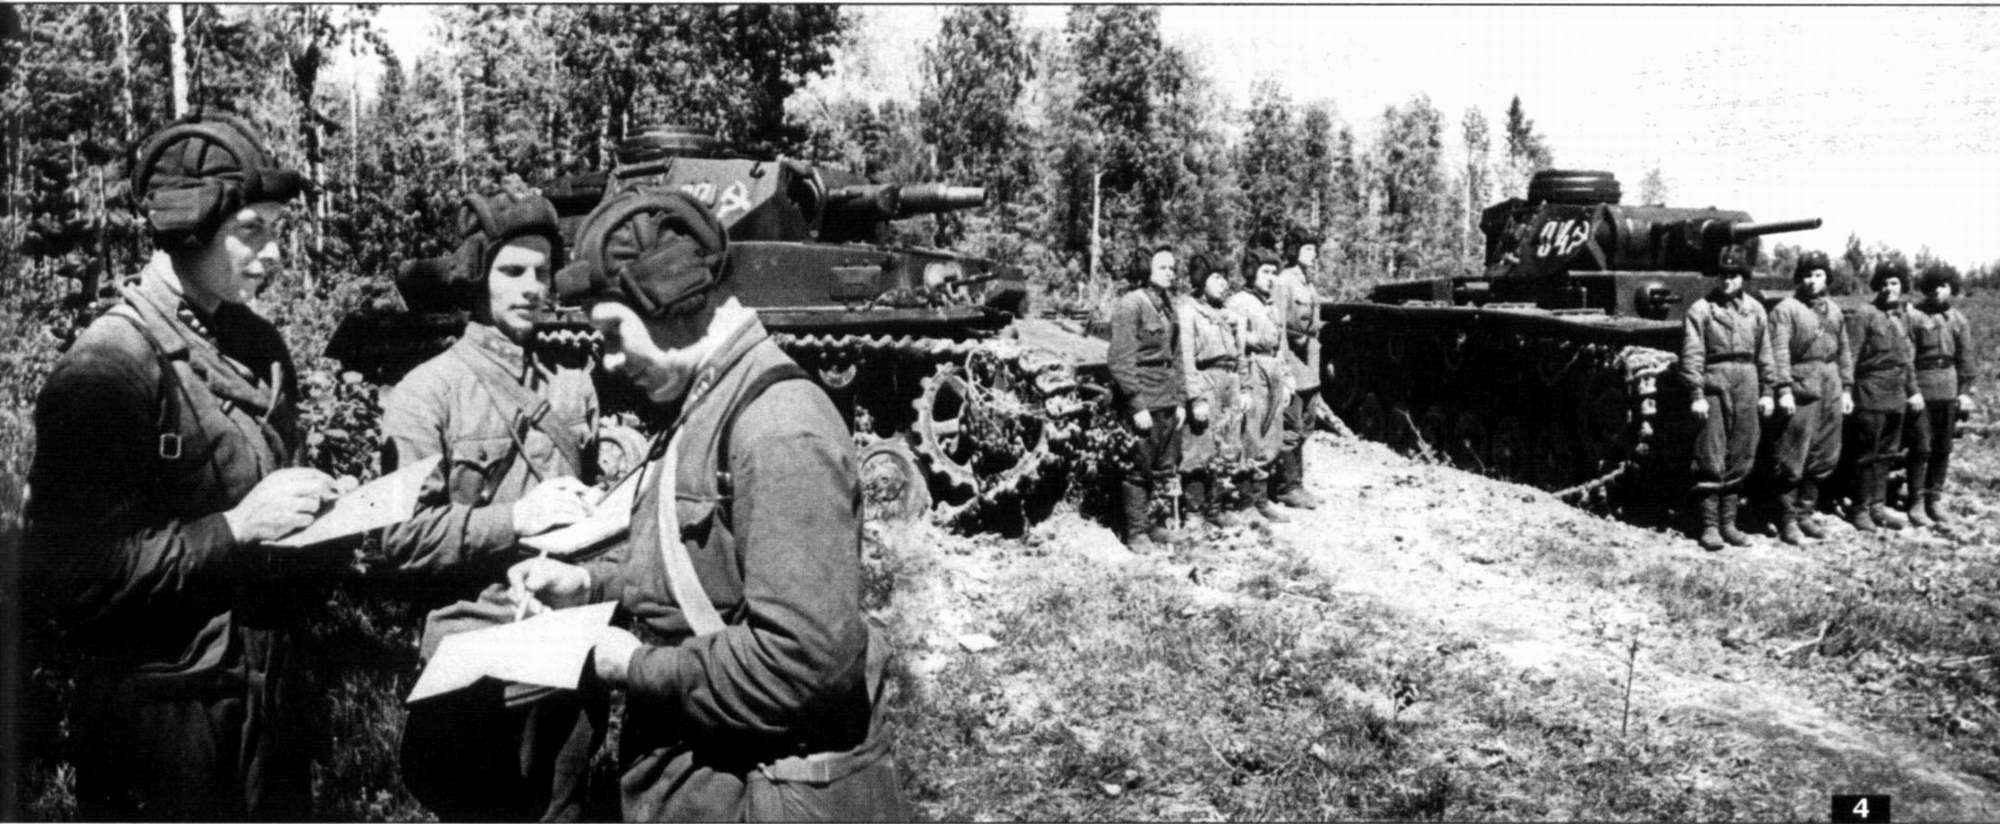 Panzers of the Red Army On the left, you can see a Panzer IV, and on the right, there's a Panzer III These tanks were captured from the Germans and put to use by the Red Army